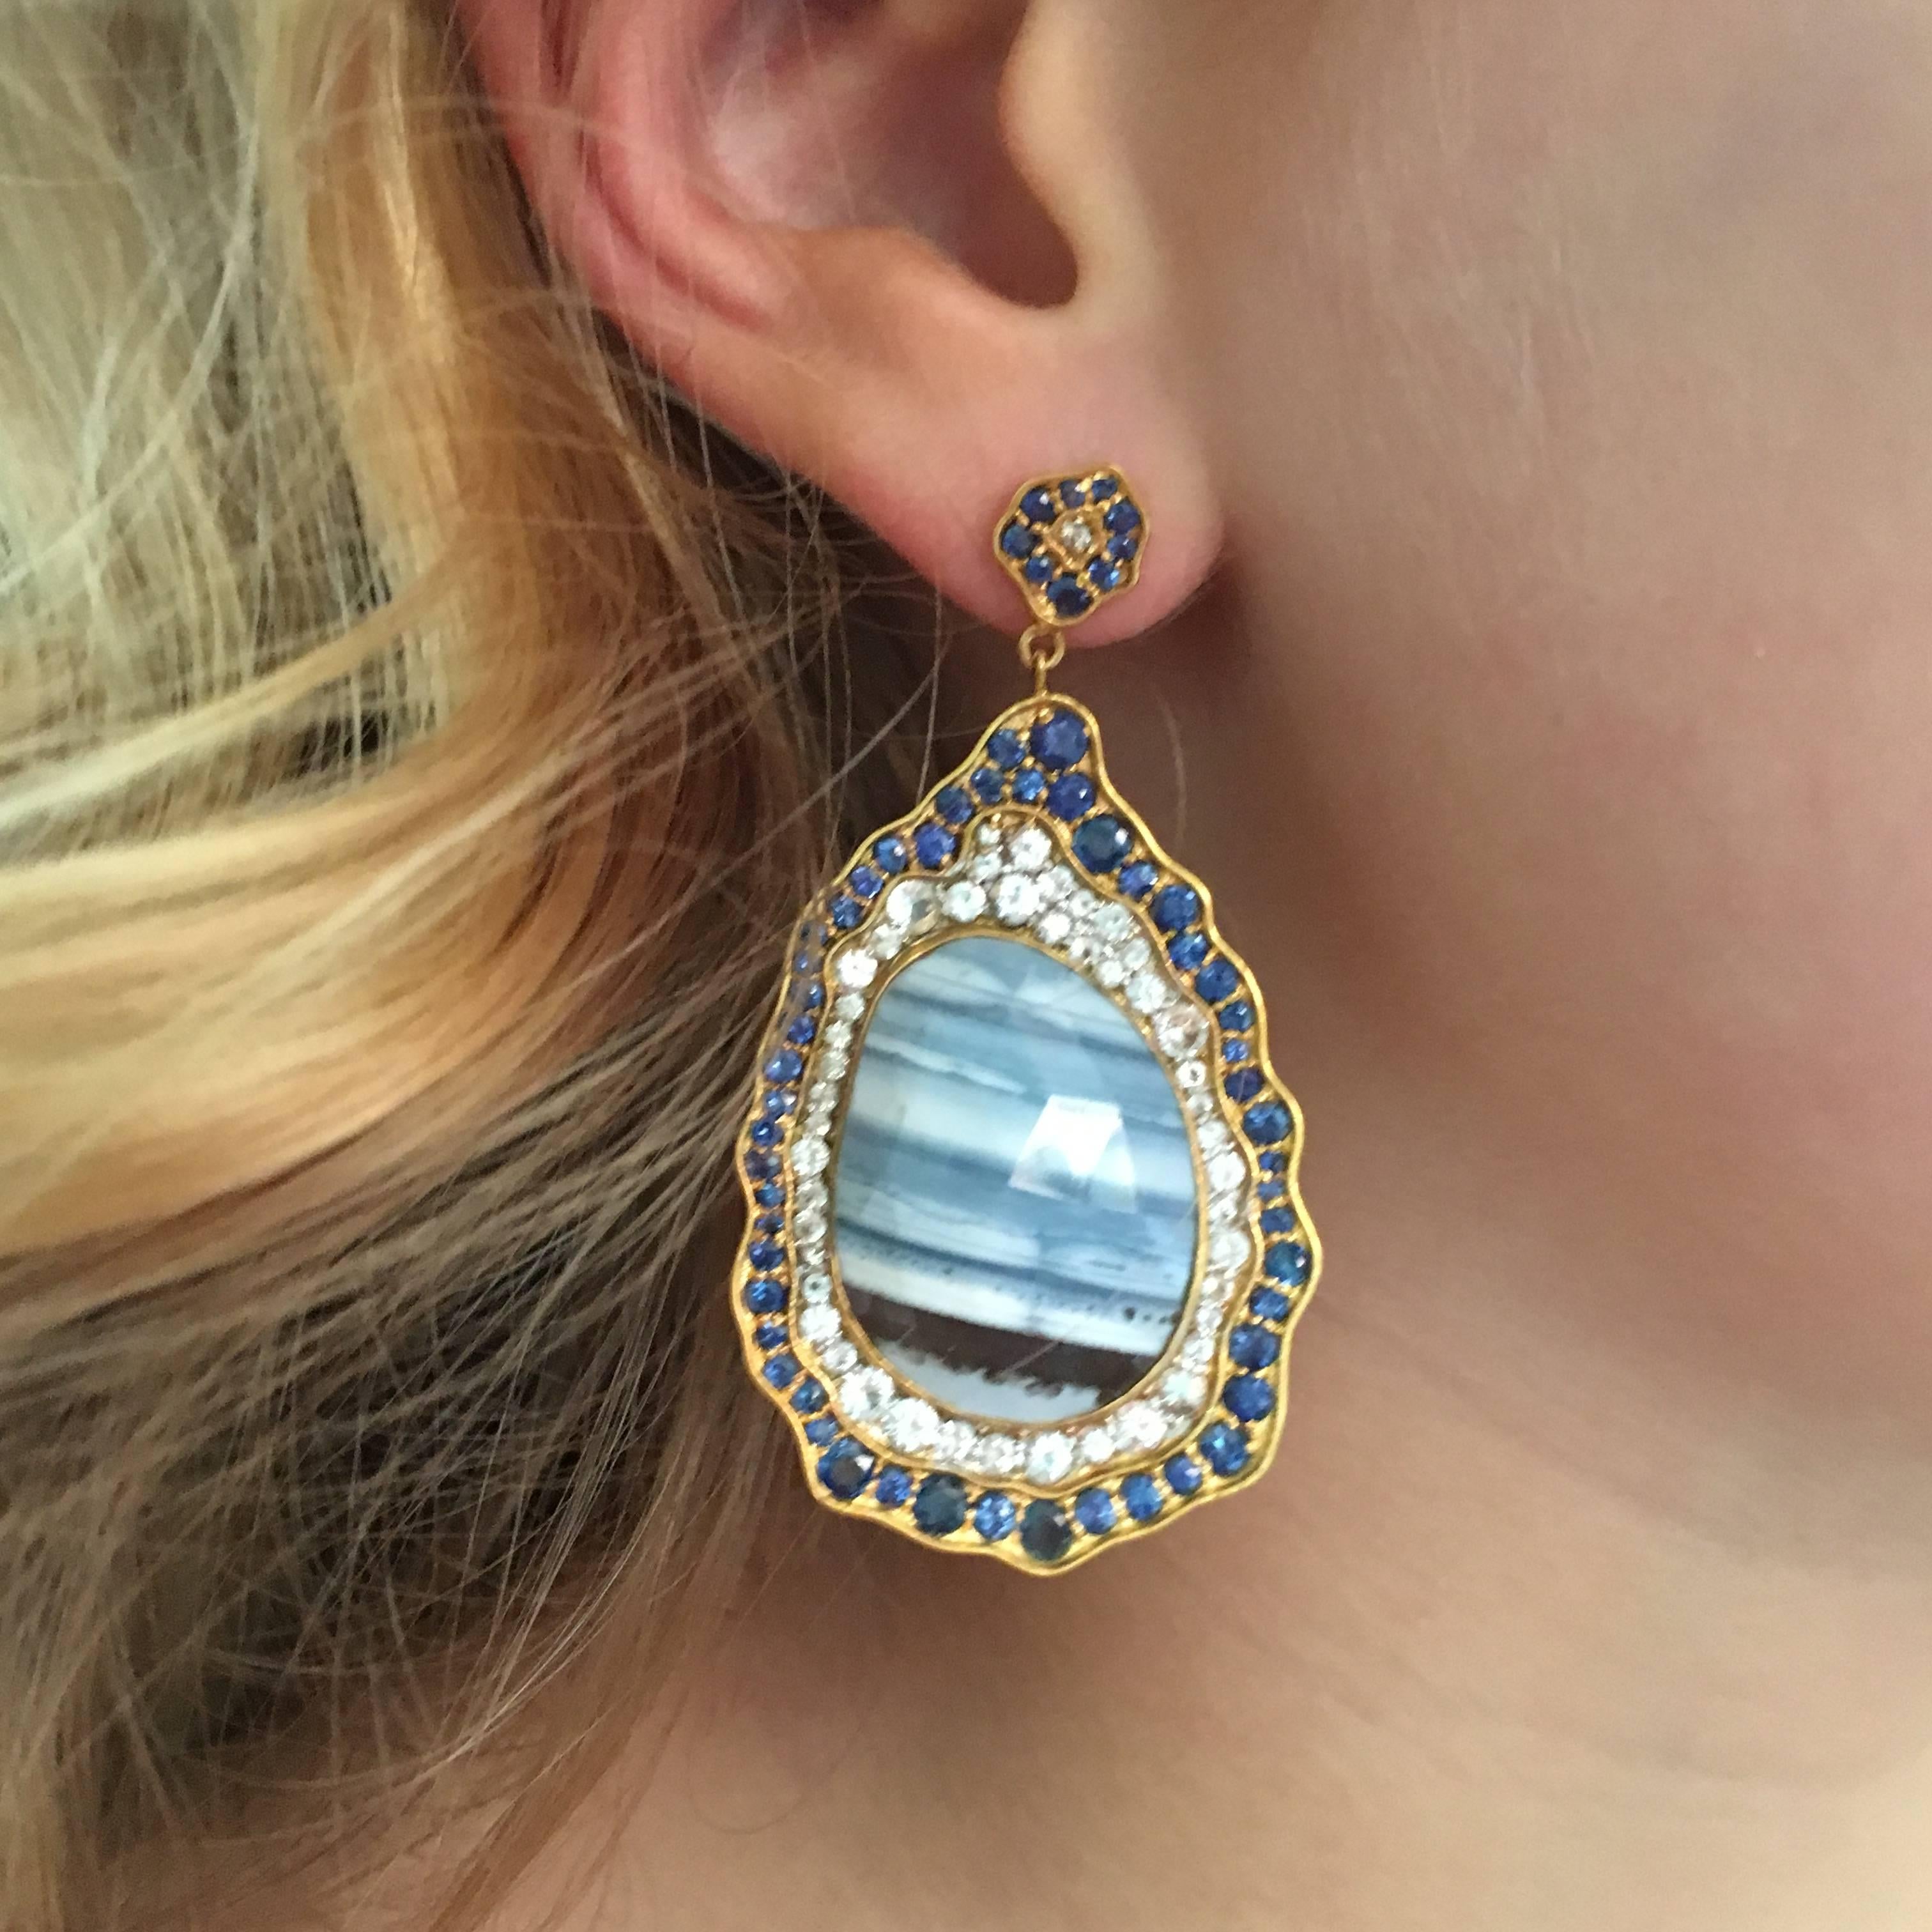 Exotic and red carpet ready!  One of a kind striped Blue, Grey and White African Opals set in organic designed bands of blue and white Sapphires in 18k matte gold on posts.  These earrings will get you noticed all evening long!  Posts come with